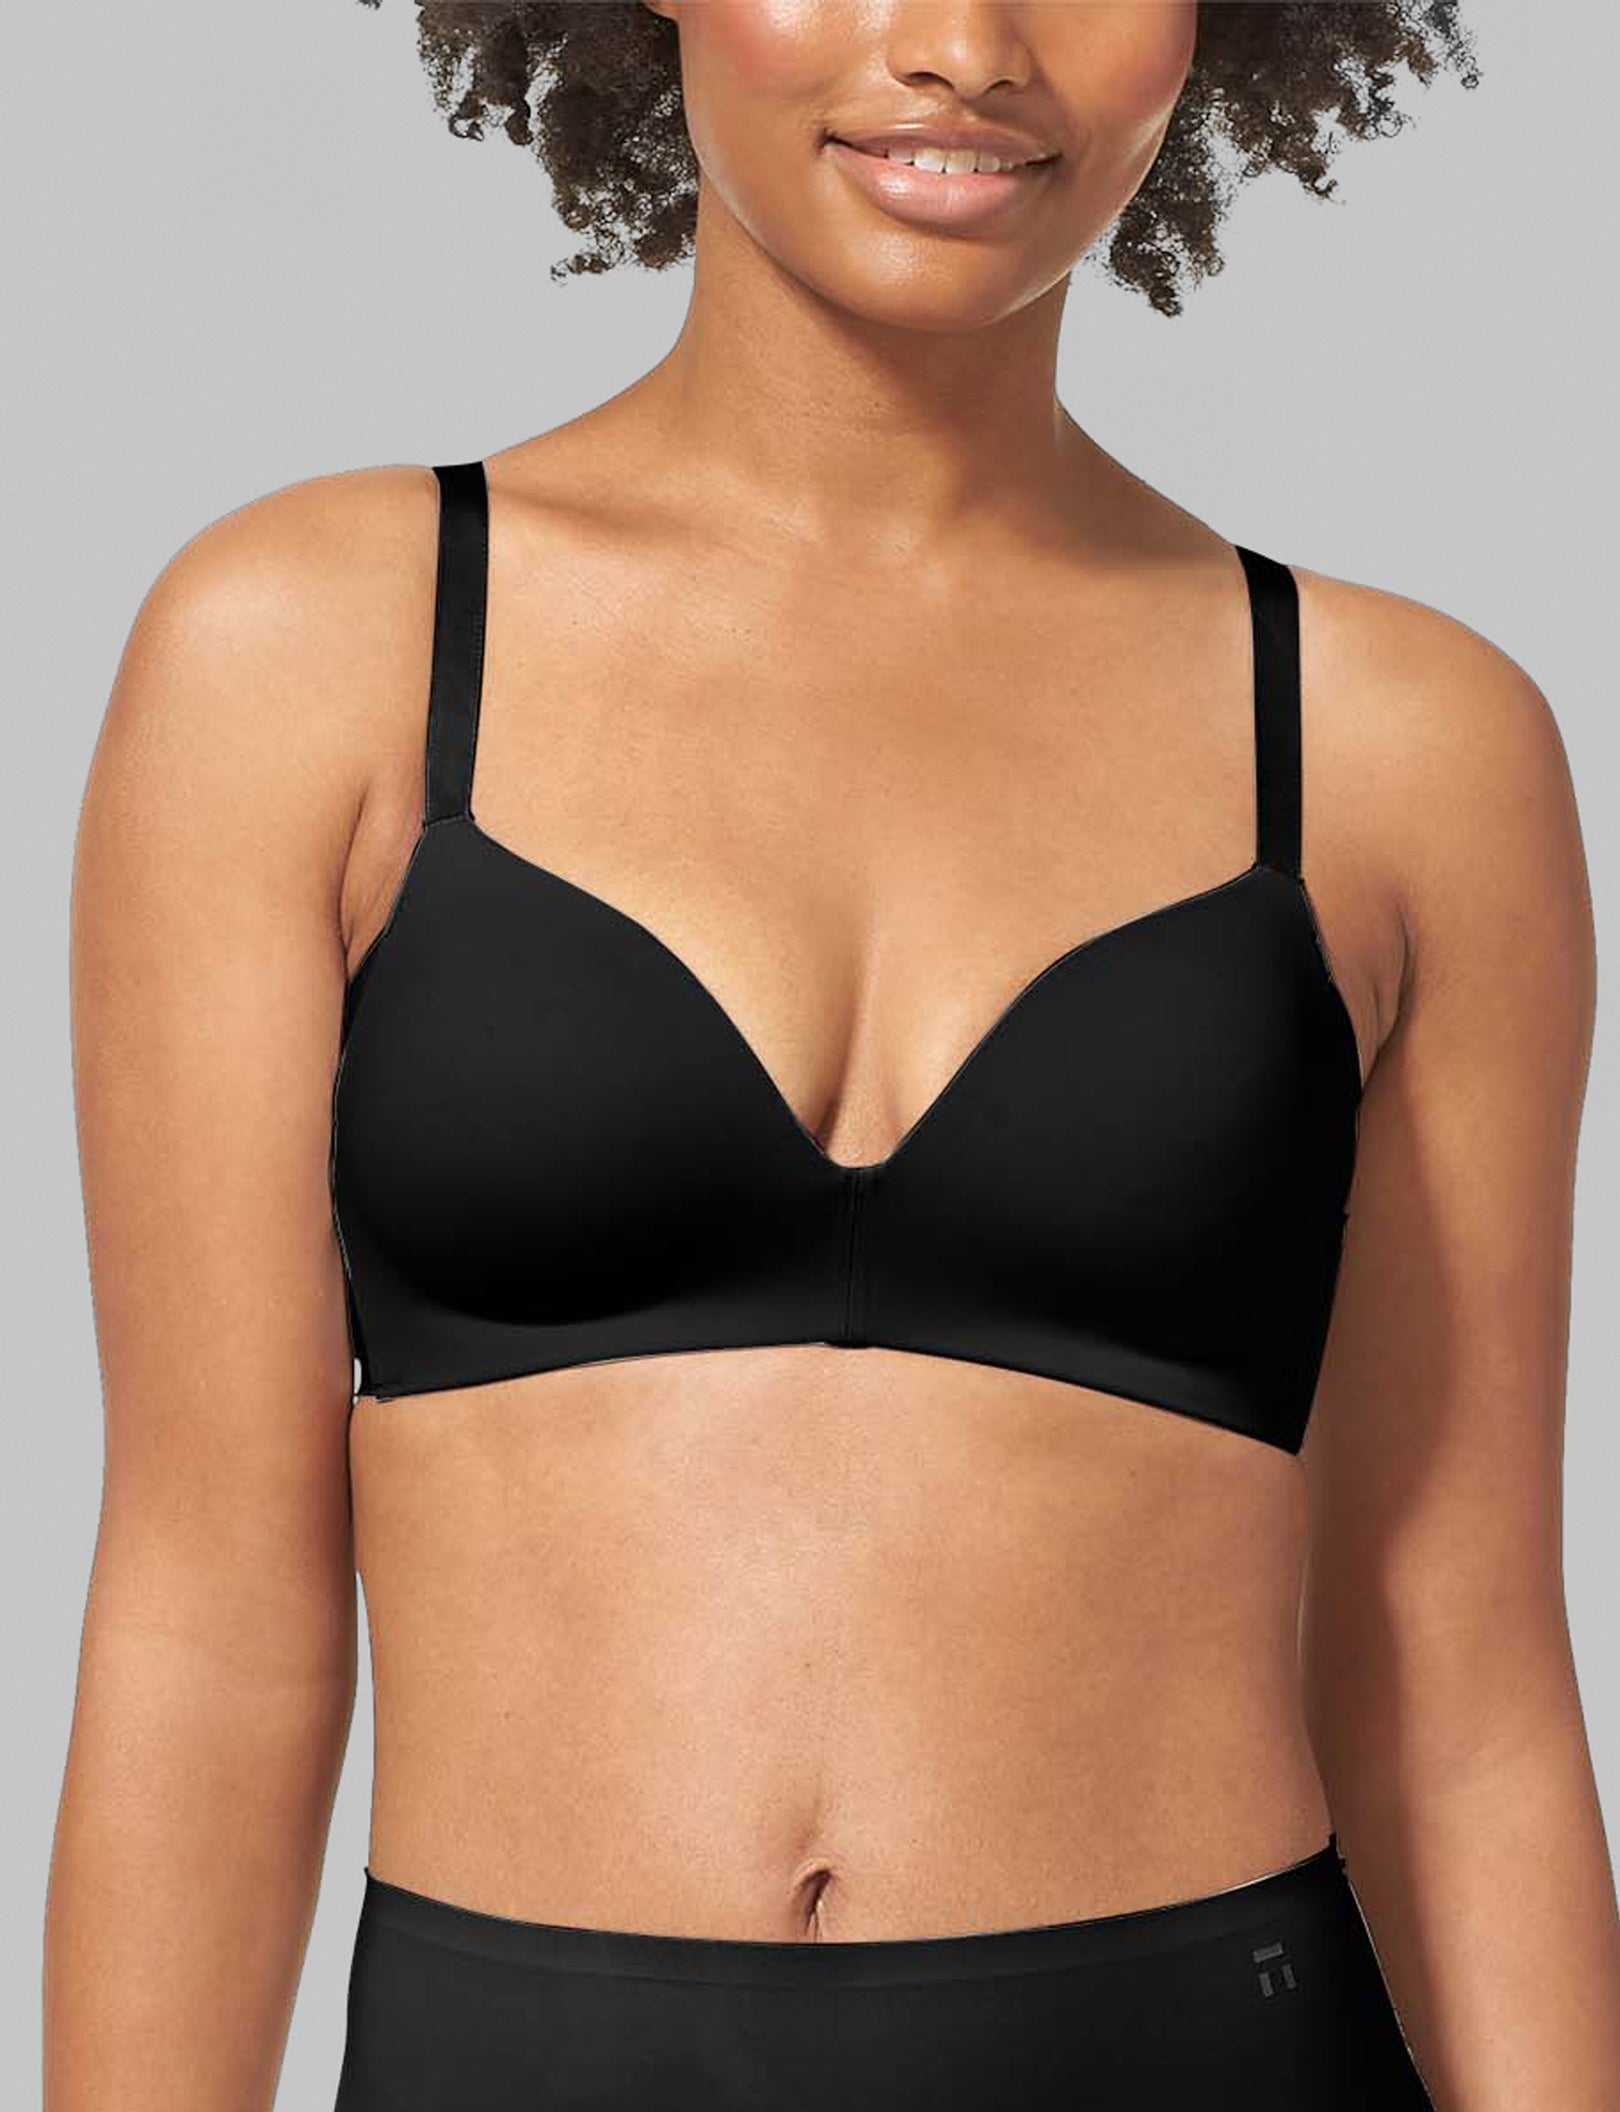  Women's Summer New Comfortable Sexy Comfortable B/C Cup Smooth  Face No Steel Ring Gathering Bra Super Bra (Khaki, 75) : Sports & Outdoors